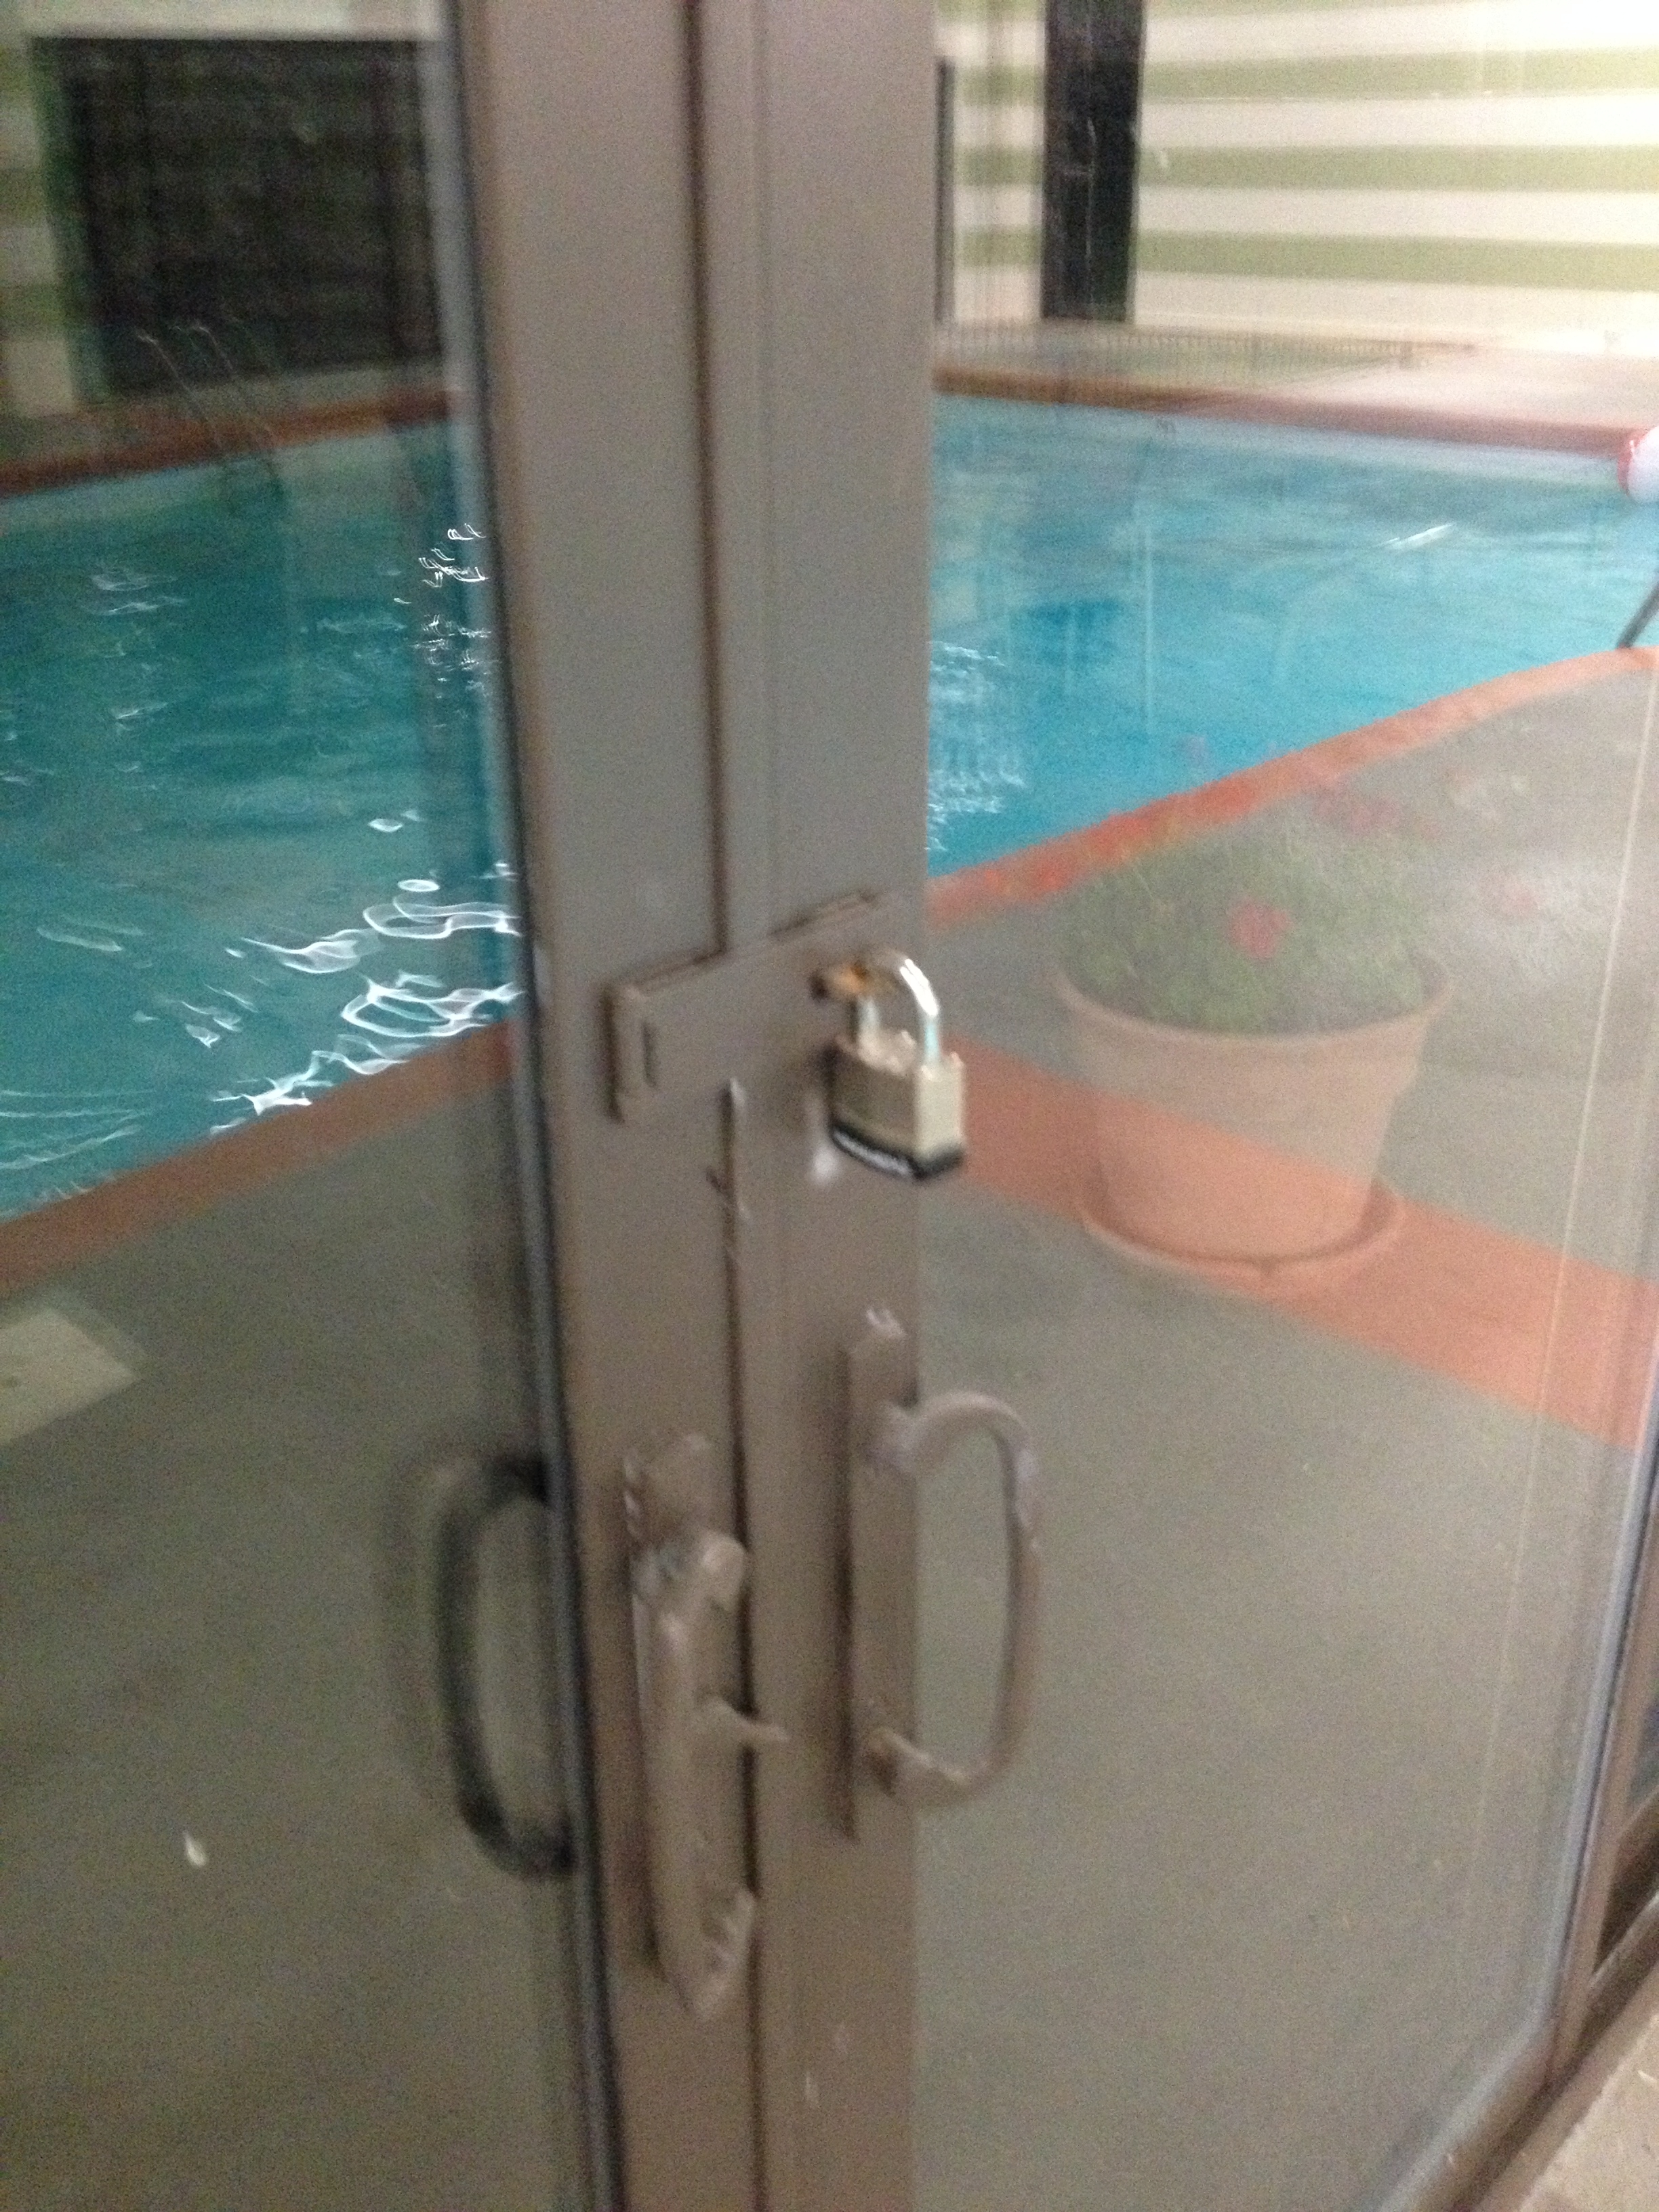 Doors to the pool building were padlocked to keep residents out.